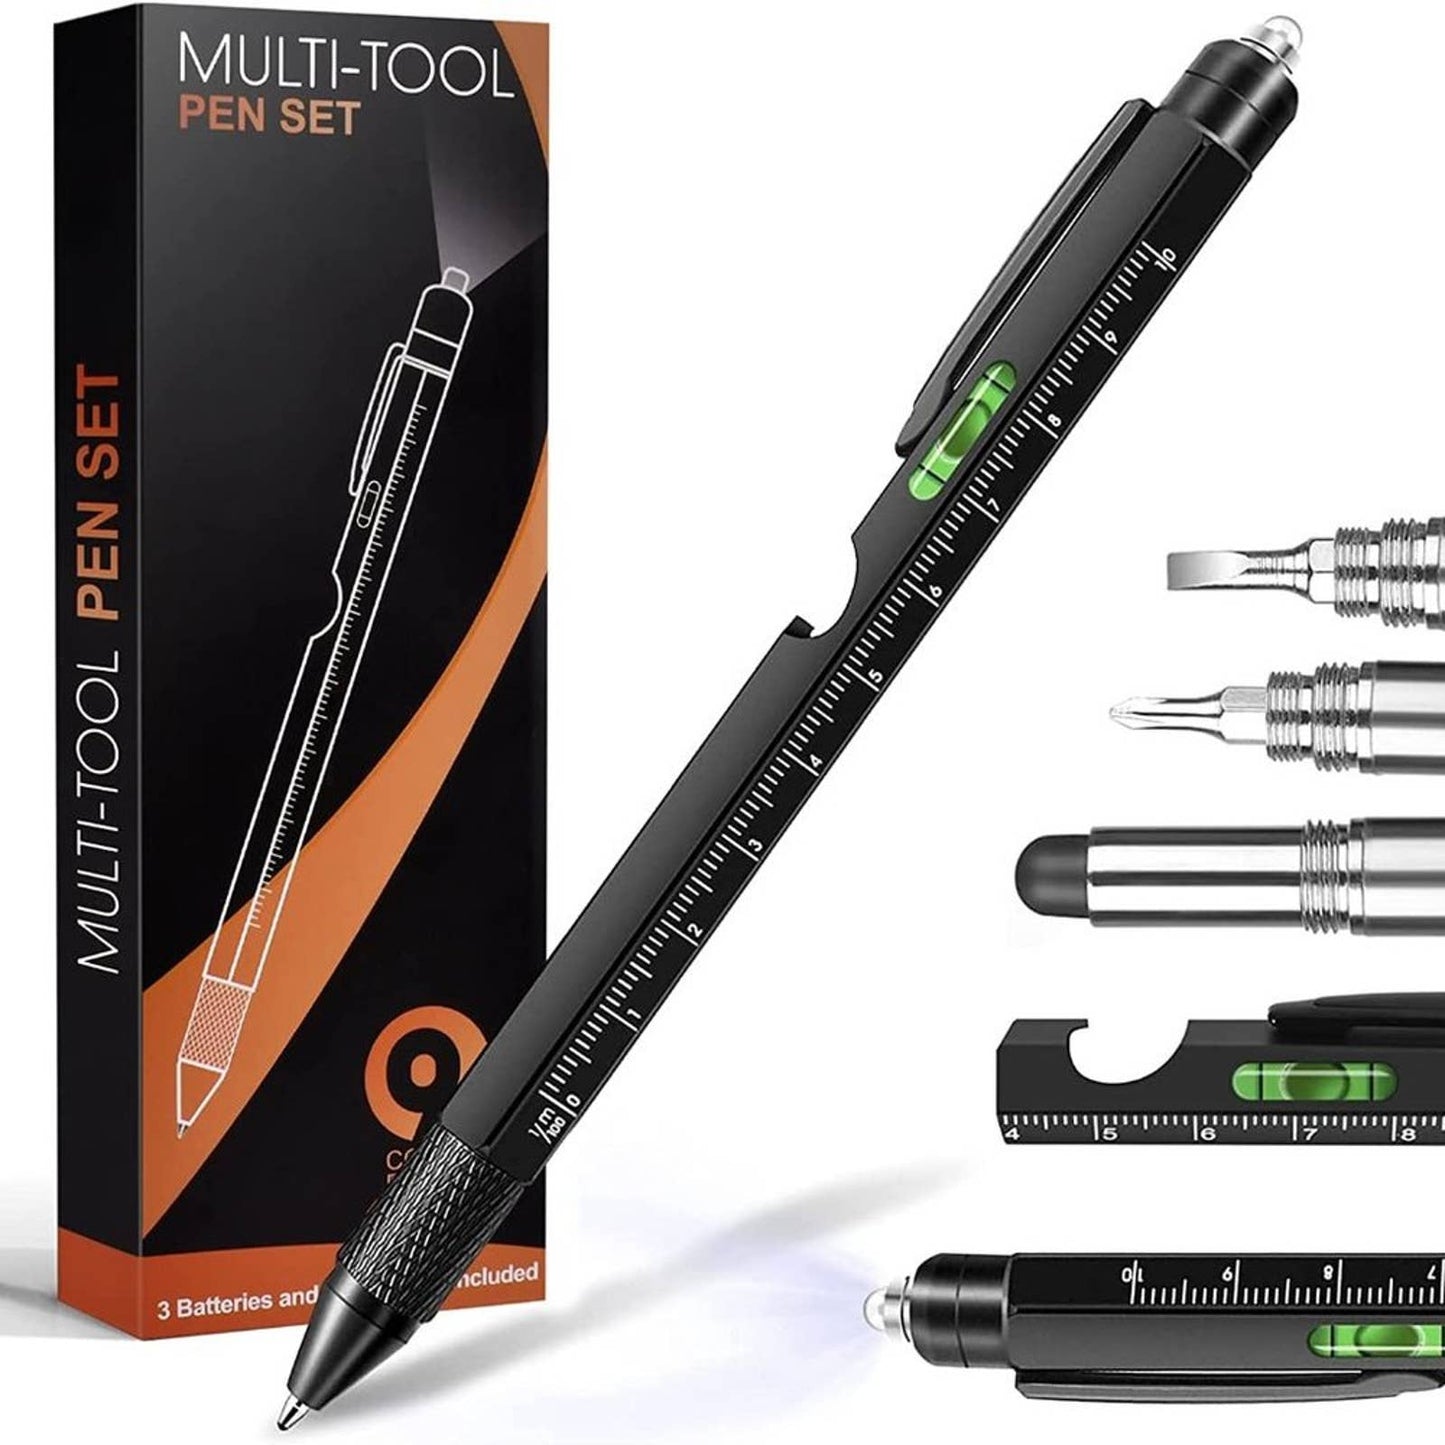 Gifts for Men, Fathers Day Dad Gifts from Daughter Son, 9 in 1 Multi Tool Pen